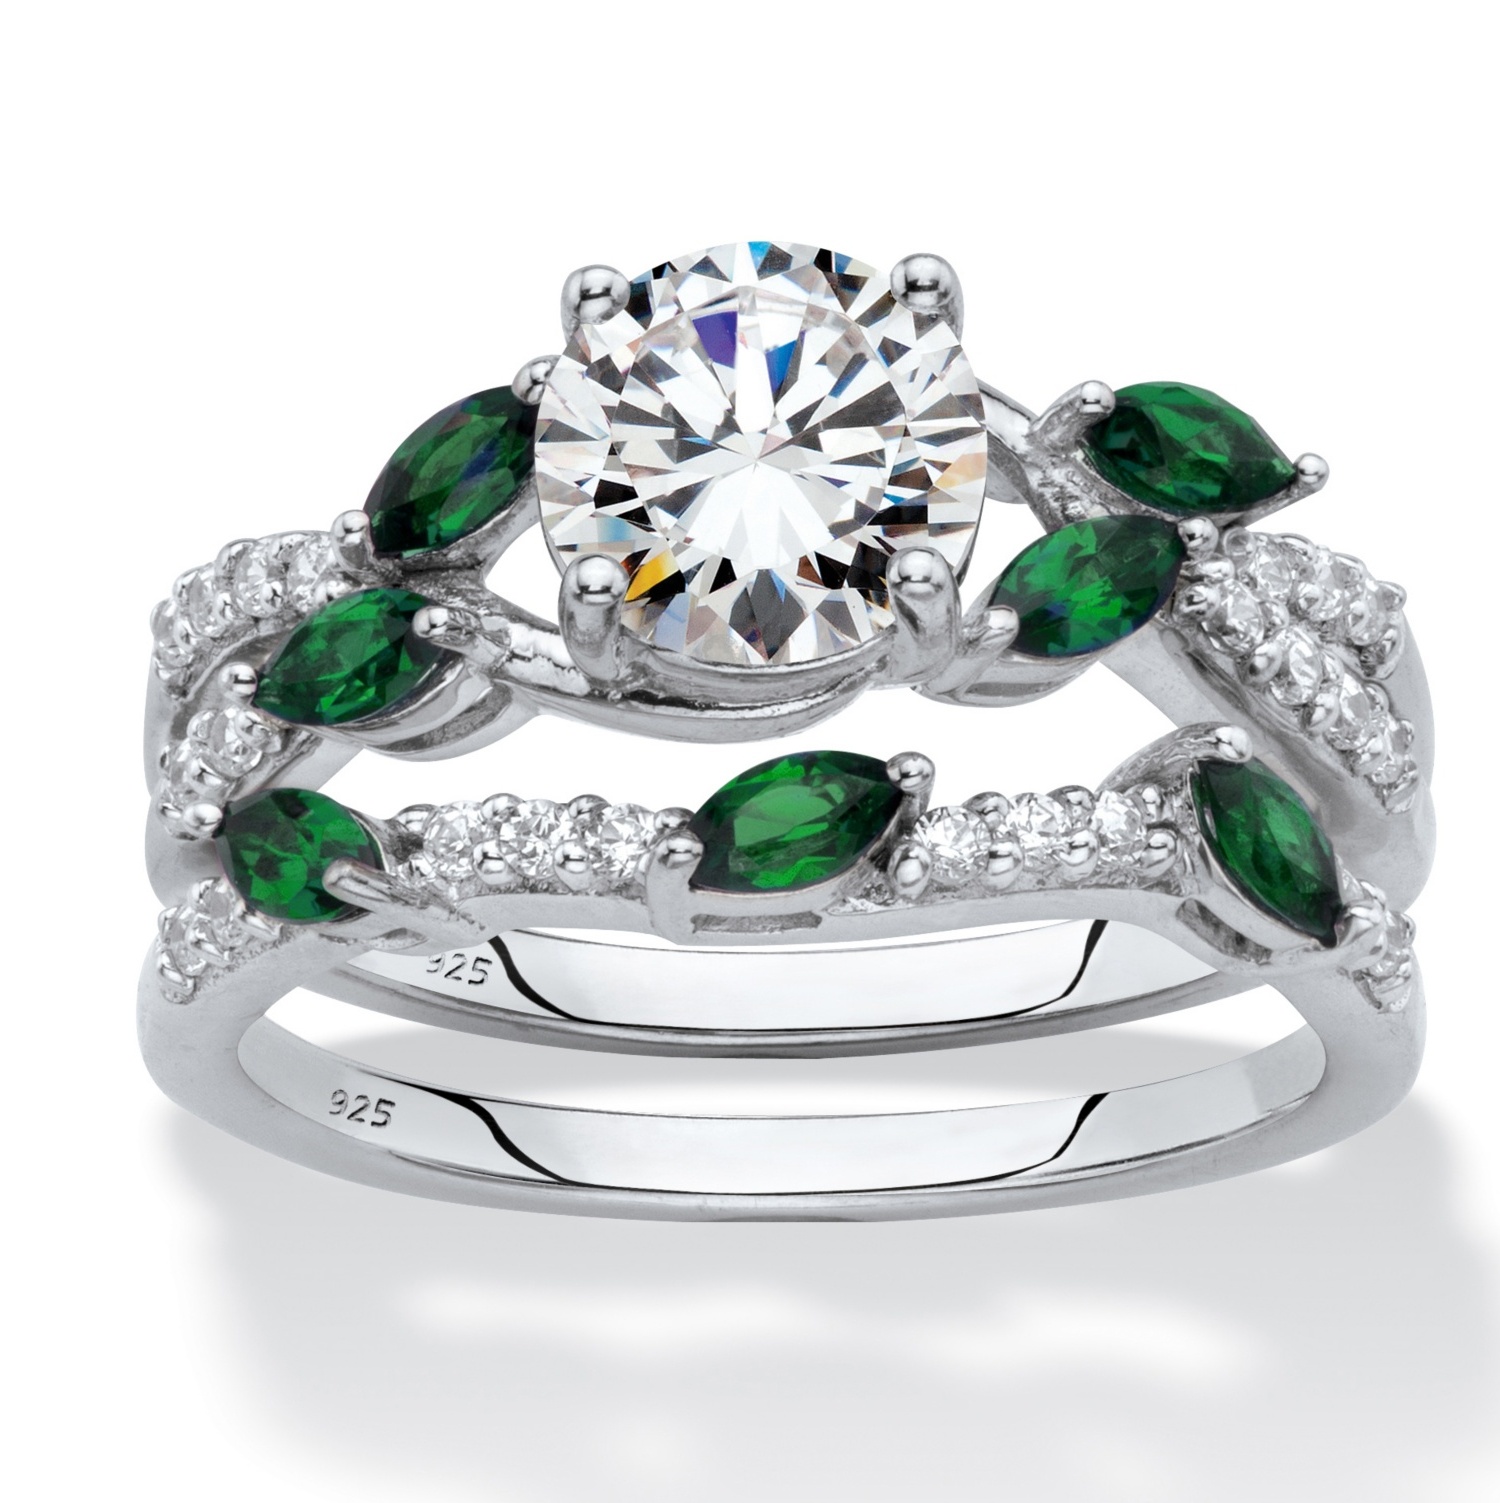 Platinum over Sterling Silver Round Cubic Zirconia with Marquise Green Emerald Twisted Vine Bridal Ring Set